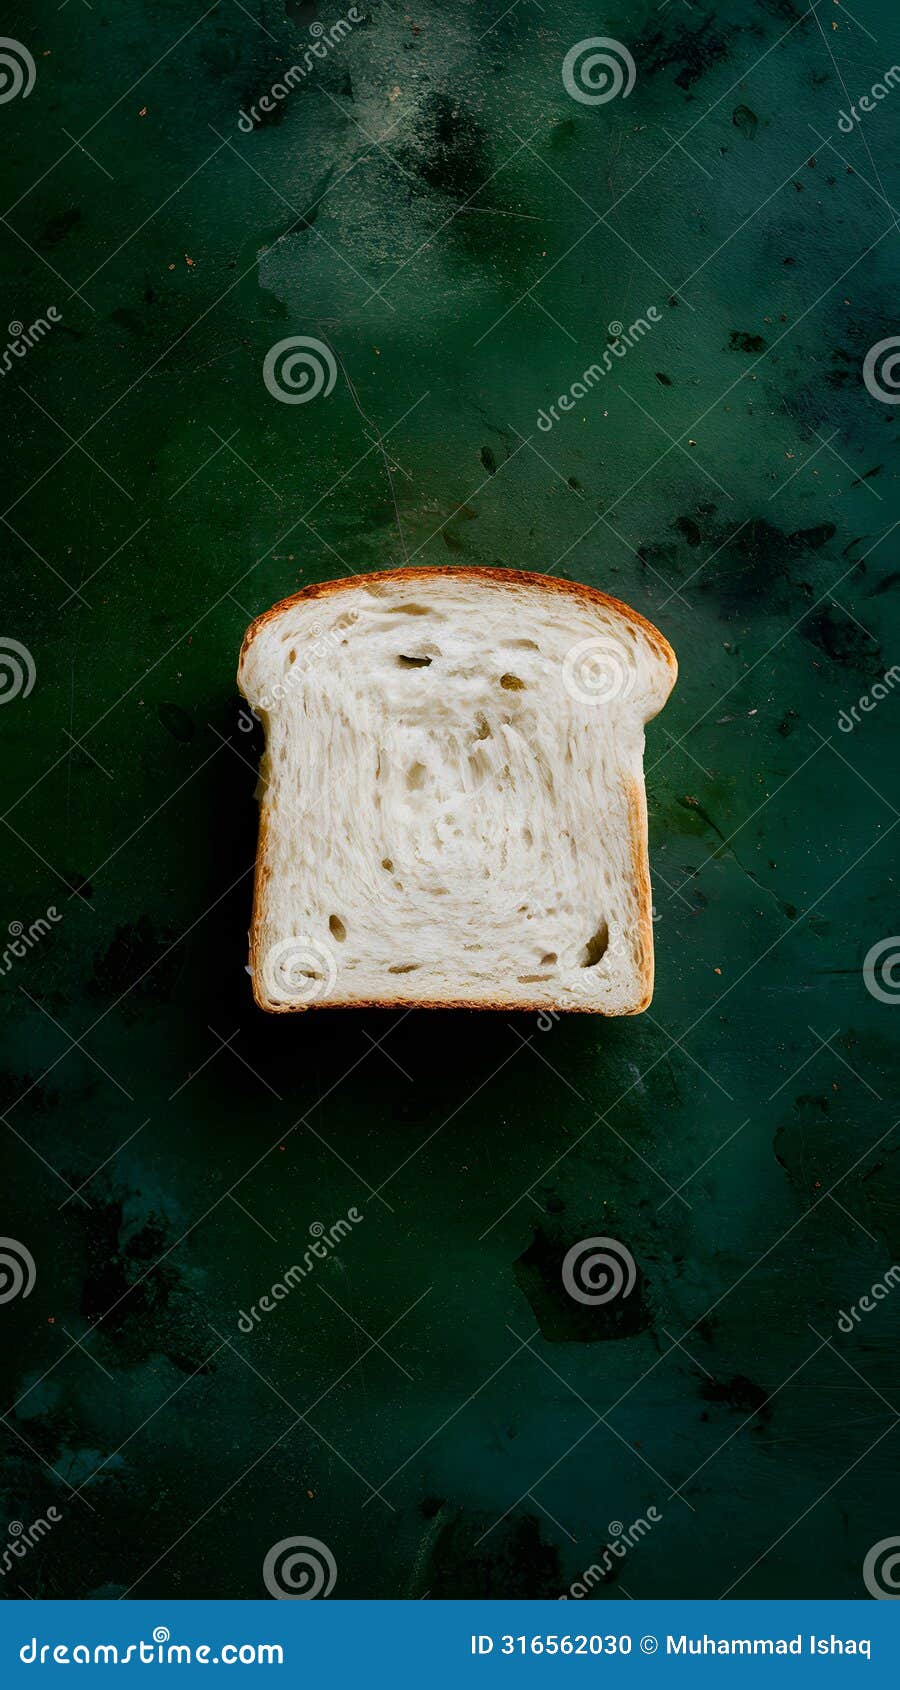 a detailed portrayal of a slice of white bread in foodgraphy